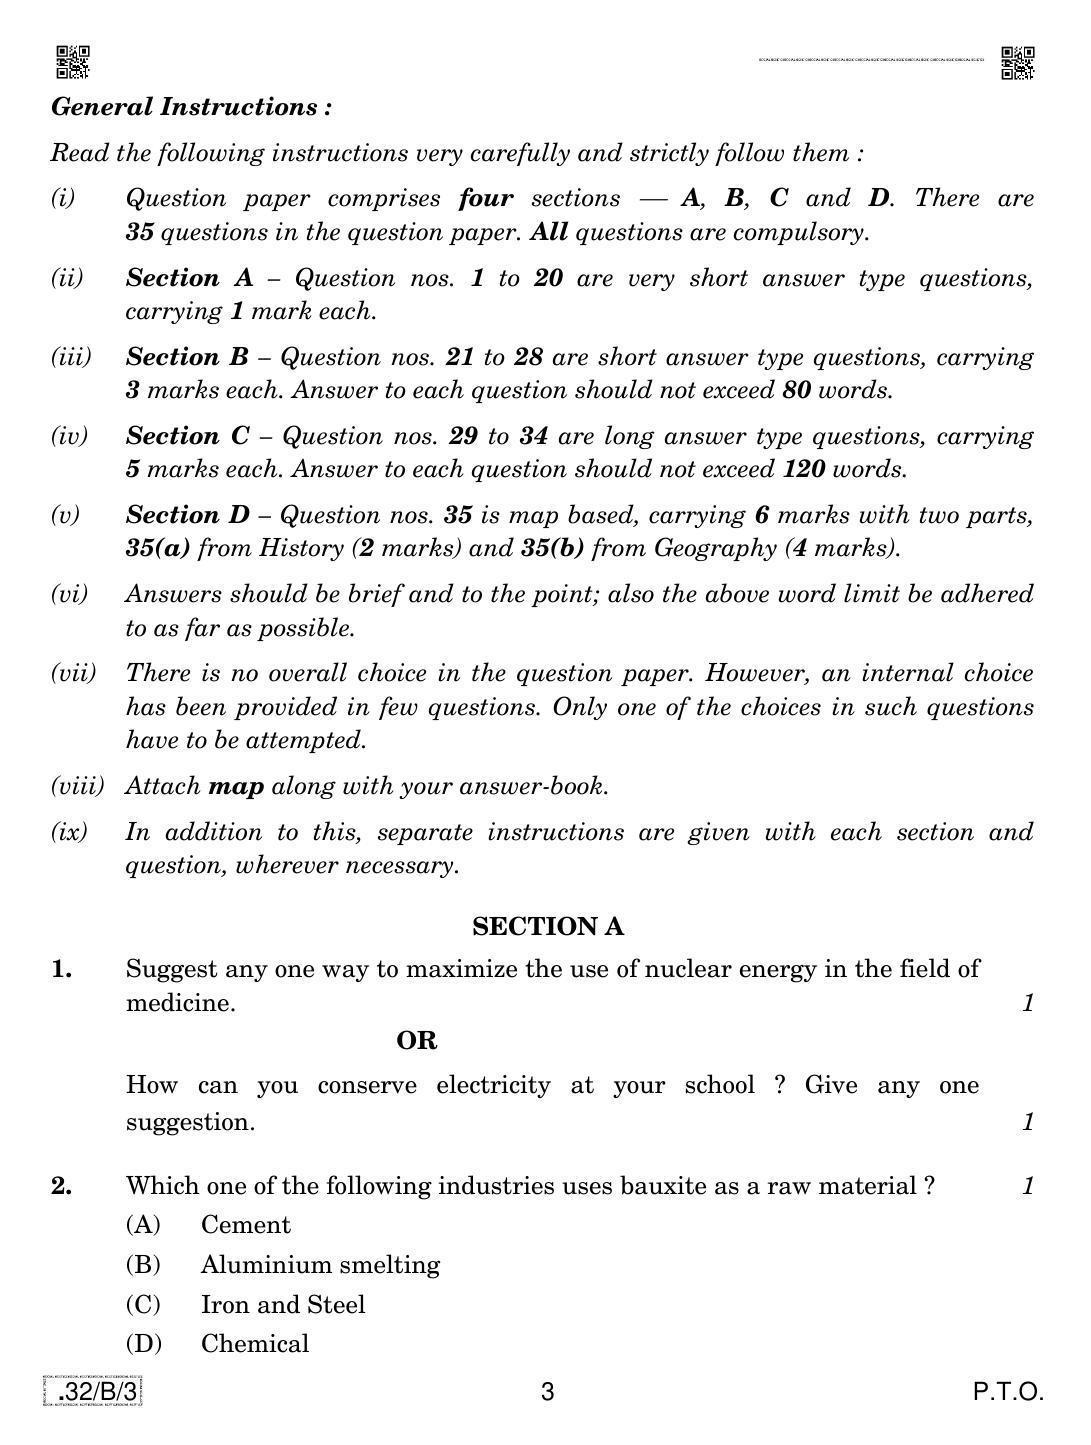 CBSE Class 10 32-C-3 Social Science 2020 Compartment Question Paper - Page 3